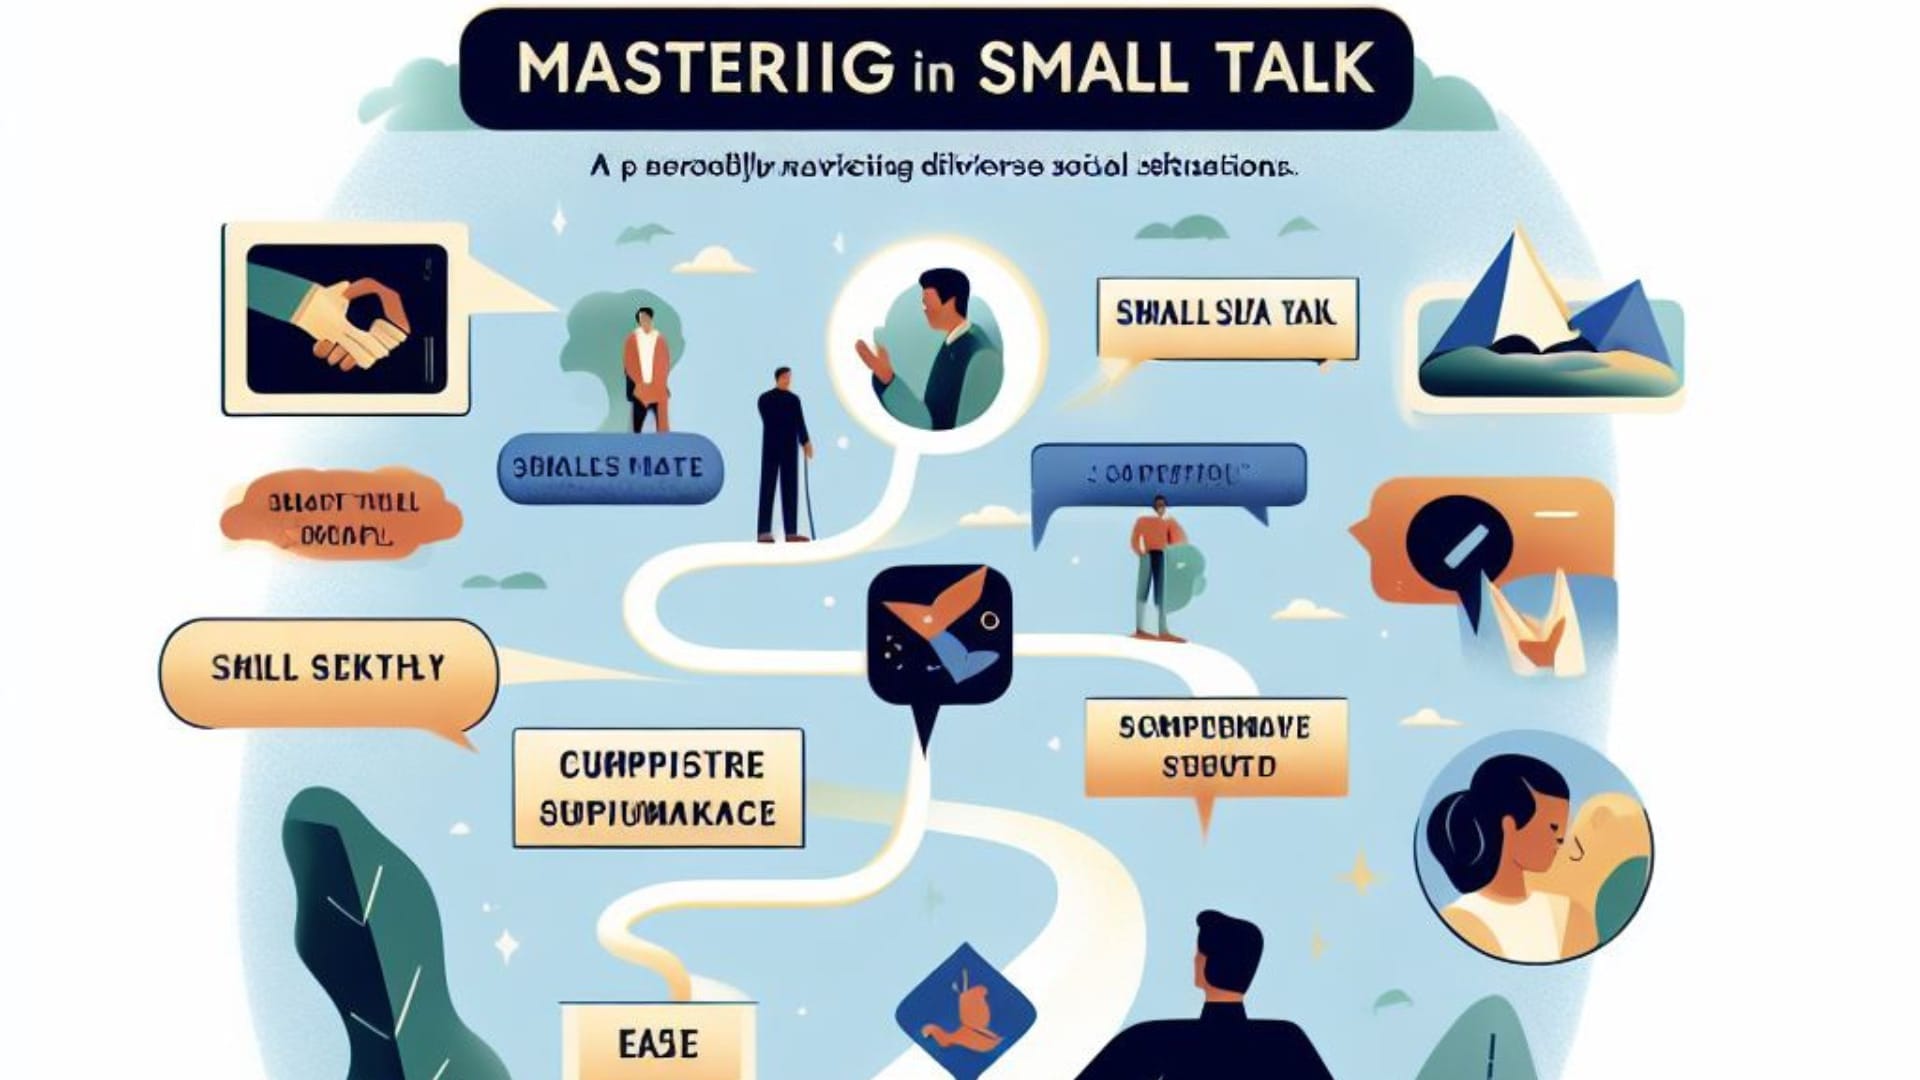 A confident individual excelling in small talk, effortlessly navigating diverse social scenarios. Mastering the art of conversing with strangers showcased in this image, embodying the skills outlined in the comprehensive guide on how to do small talk with strangers.